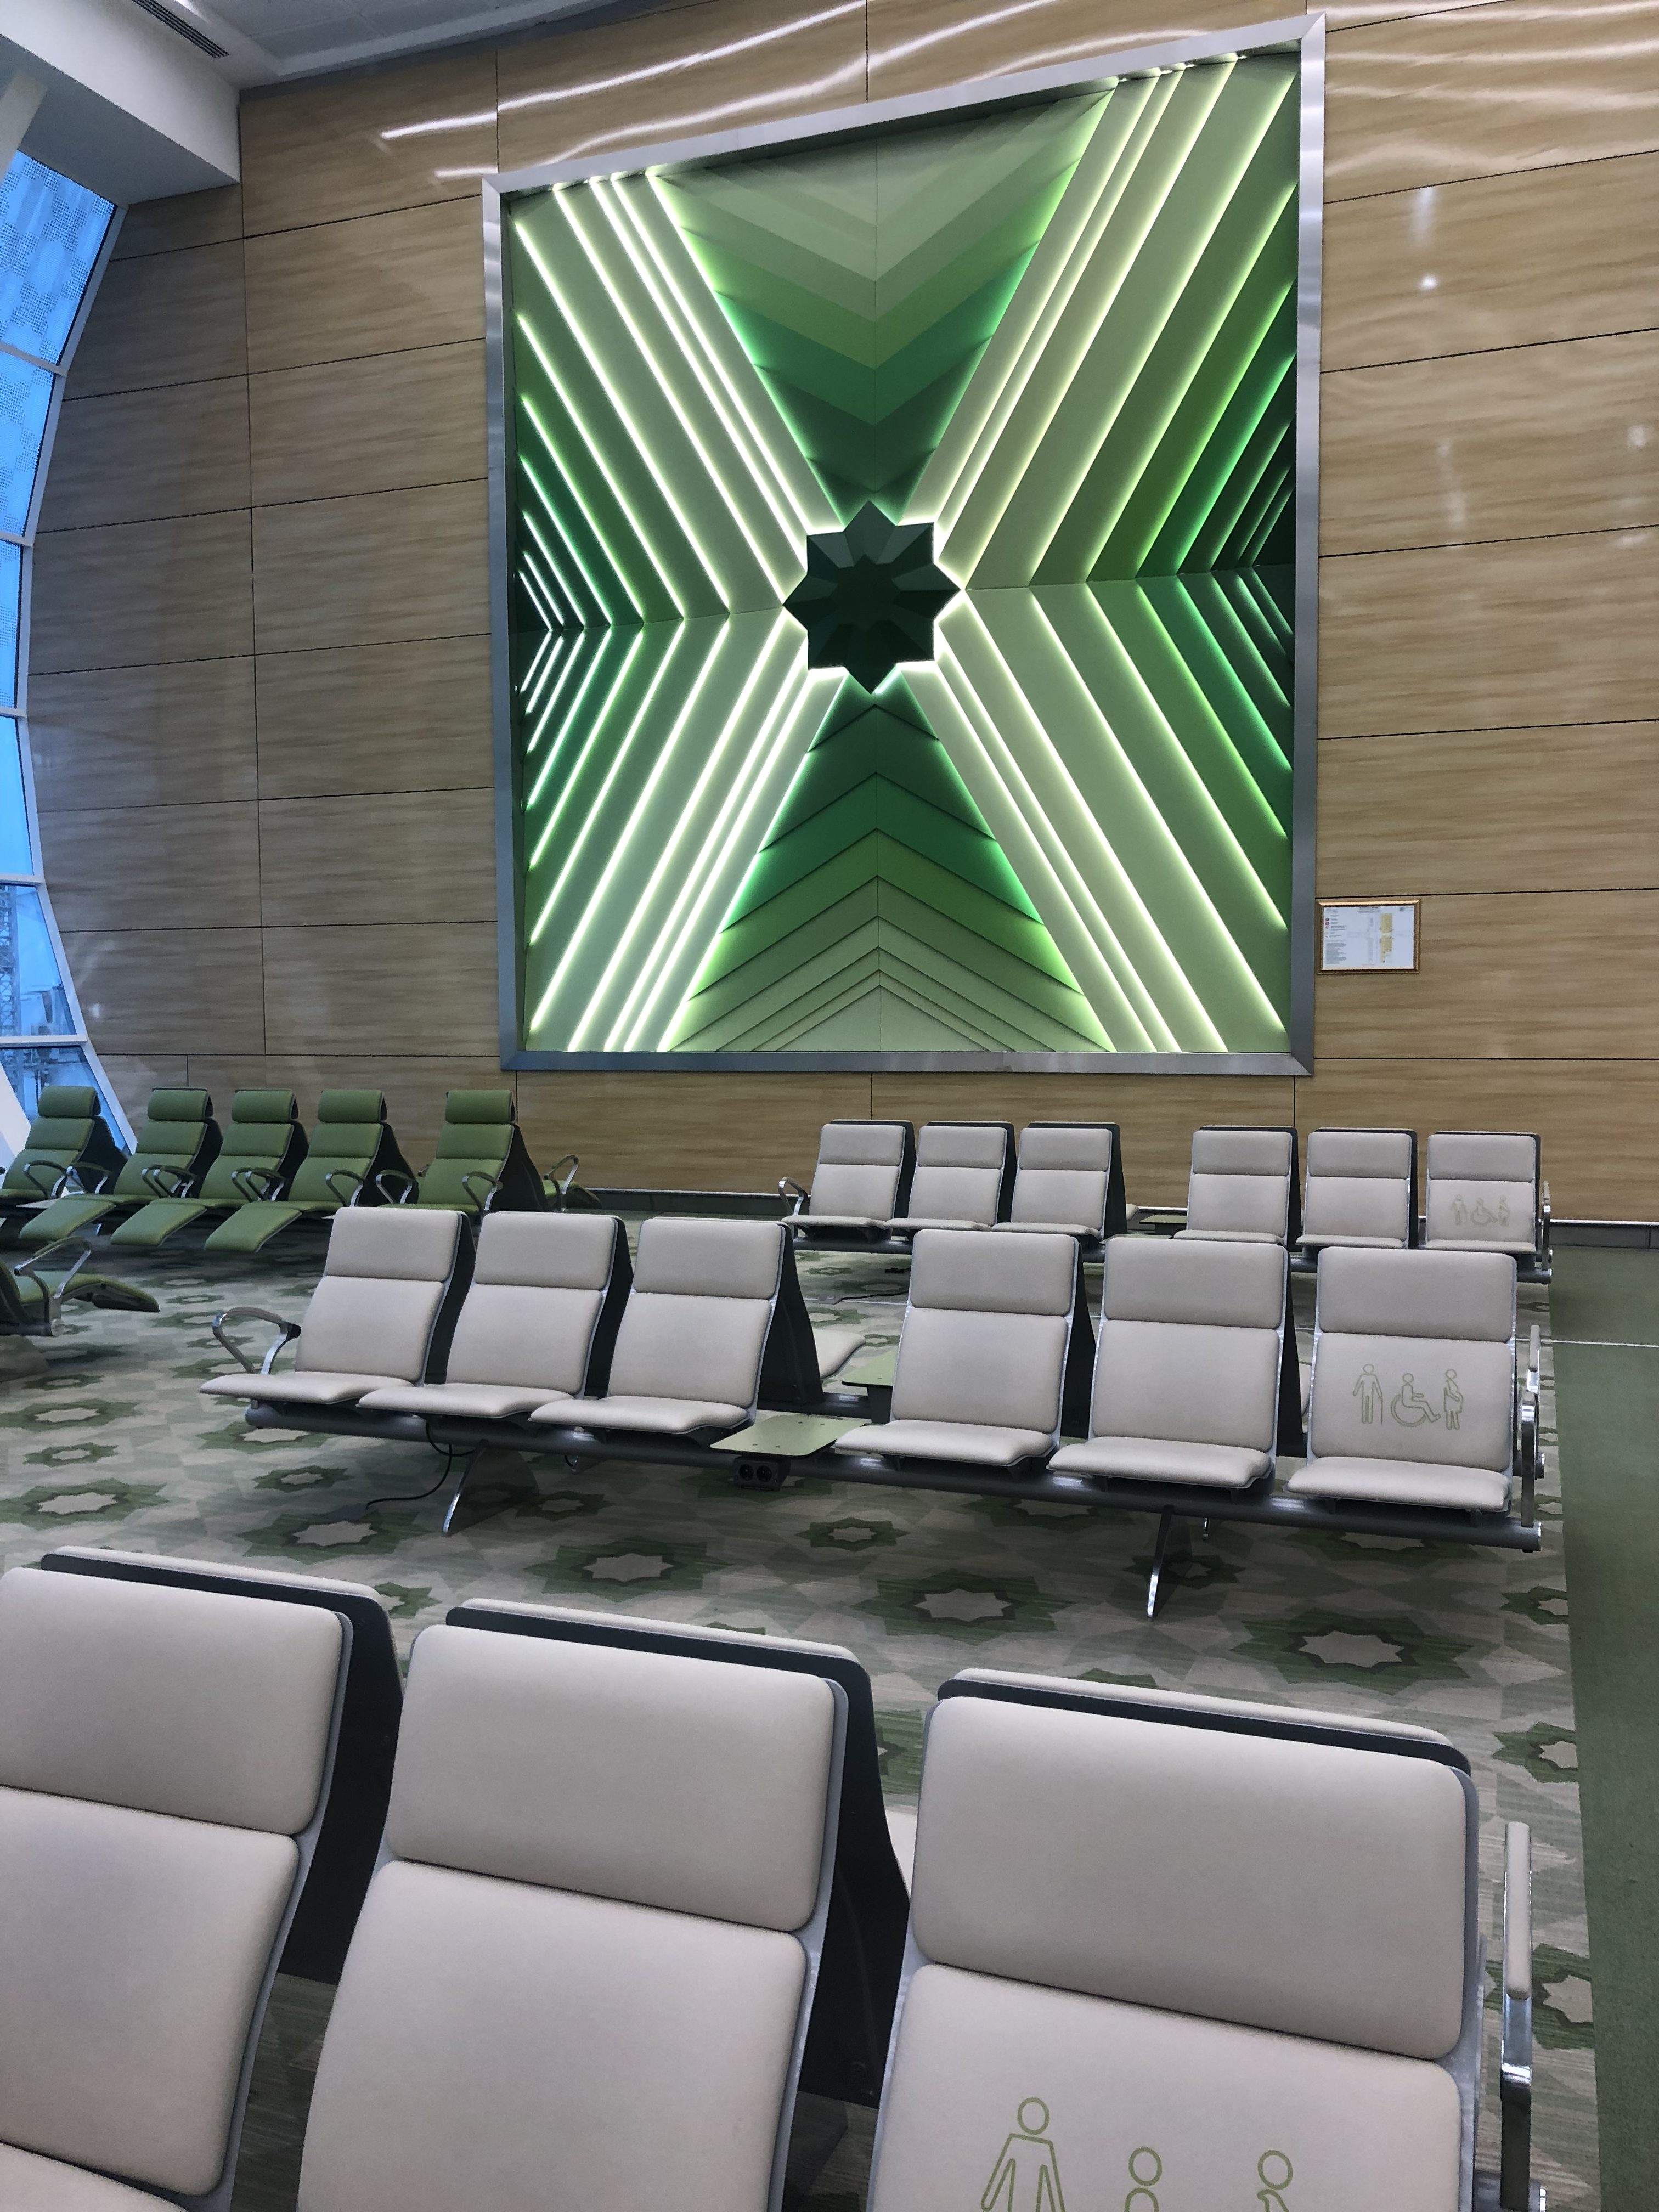 a large square picture of a green star on a wall with chairs